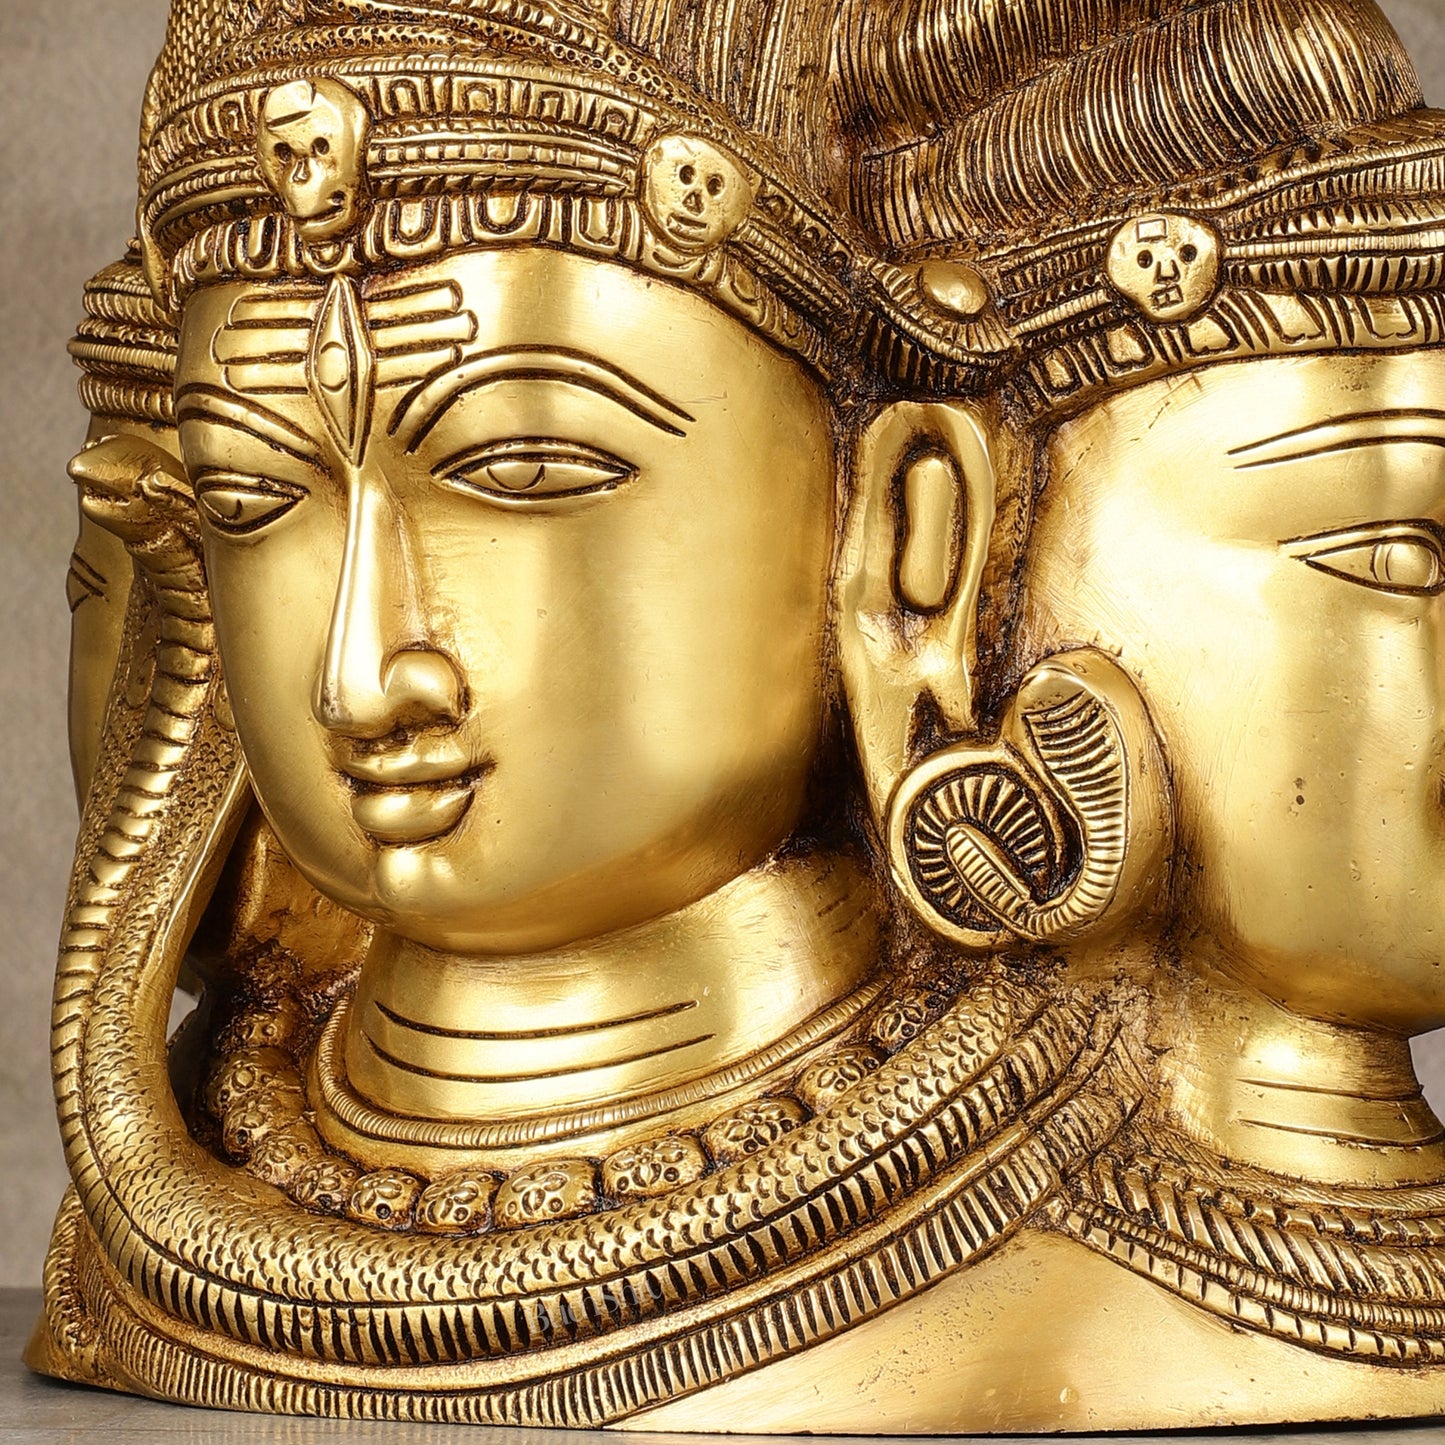 Pure Brass Superfine Three Faces Shiva with Parvati Table Accent Statue - 11"